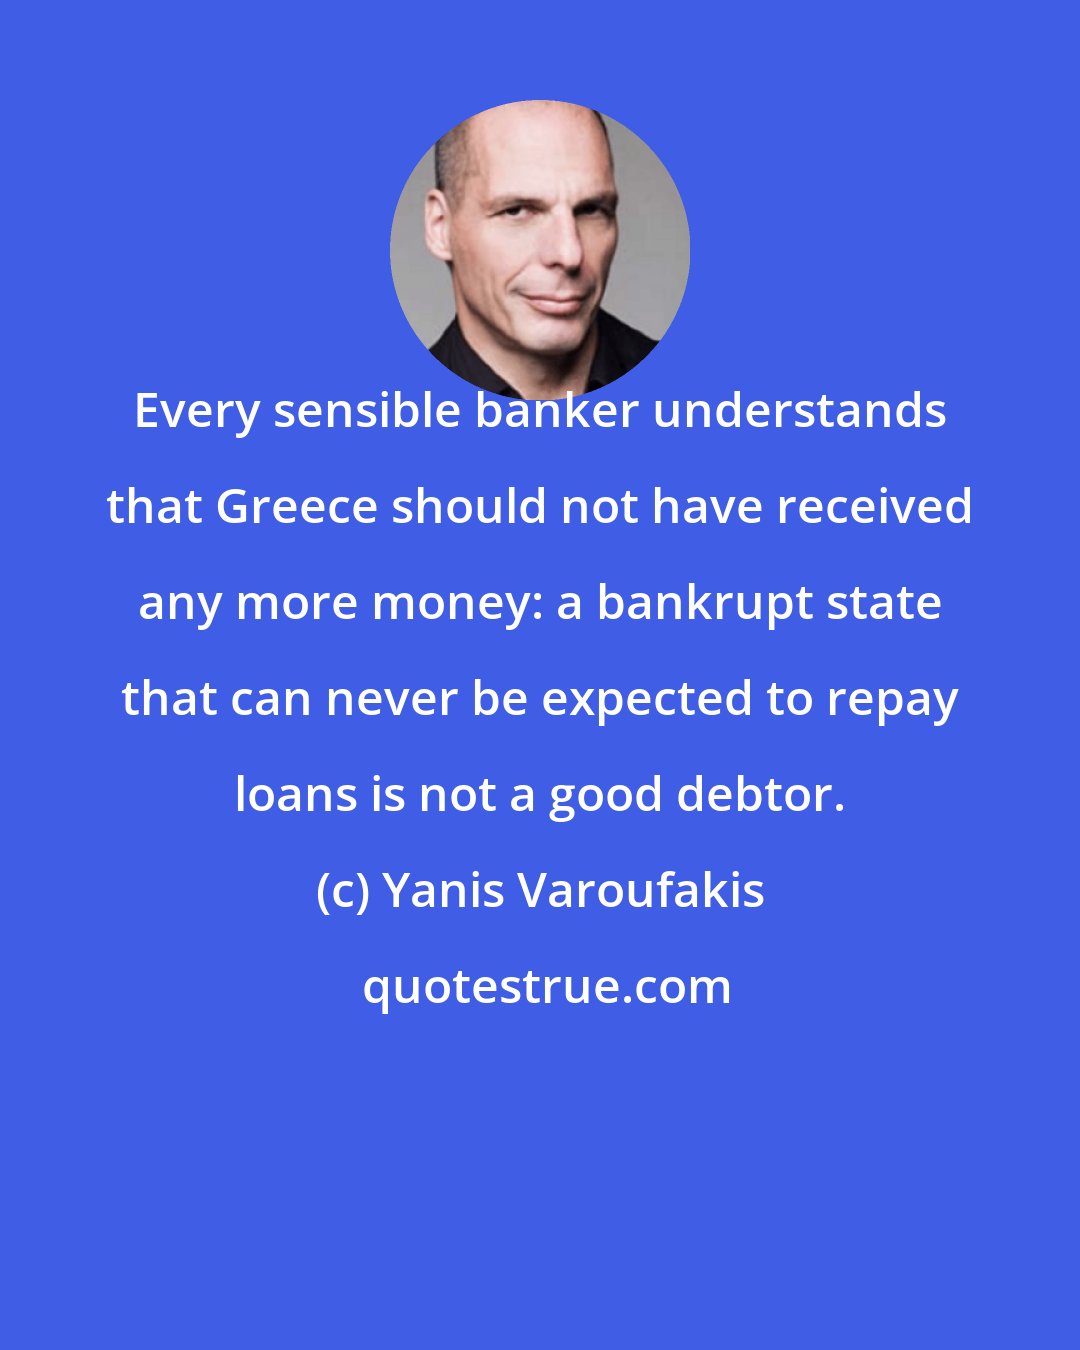 Yanis Varoufakis: Every sensible banker understands that Greece should not have received any more money: a bankrupt state that can never be expected to repay loans is not a good debtor.